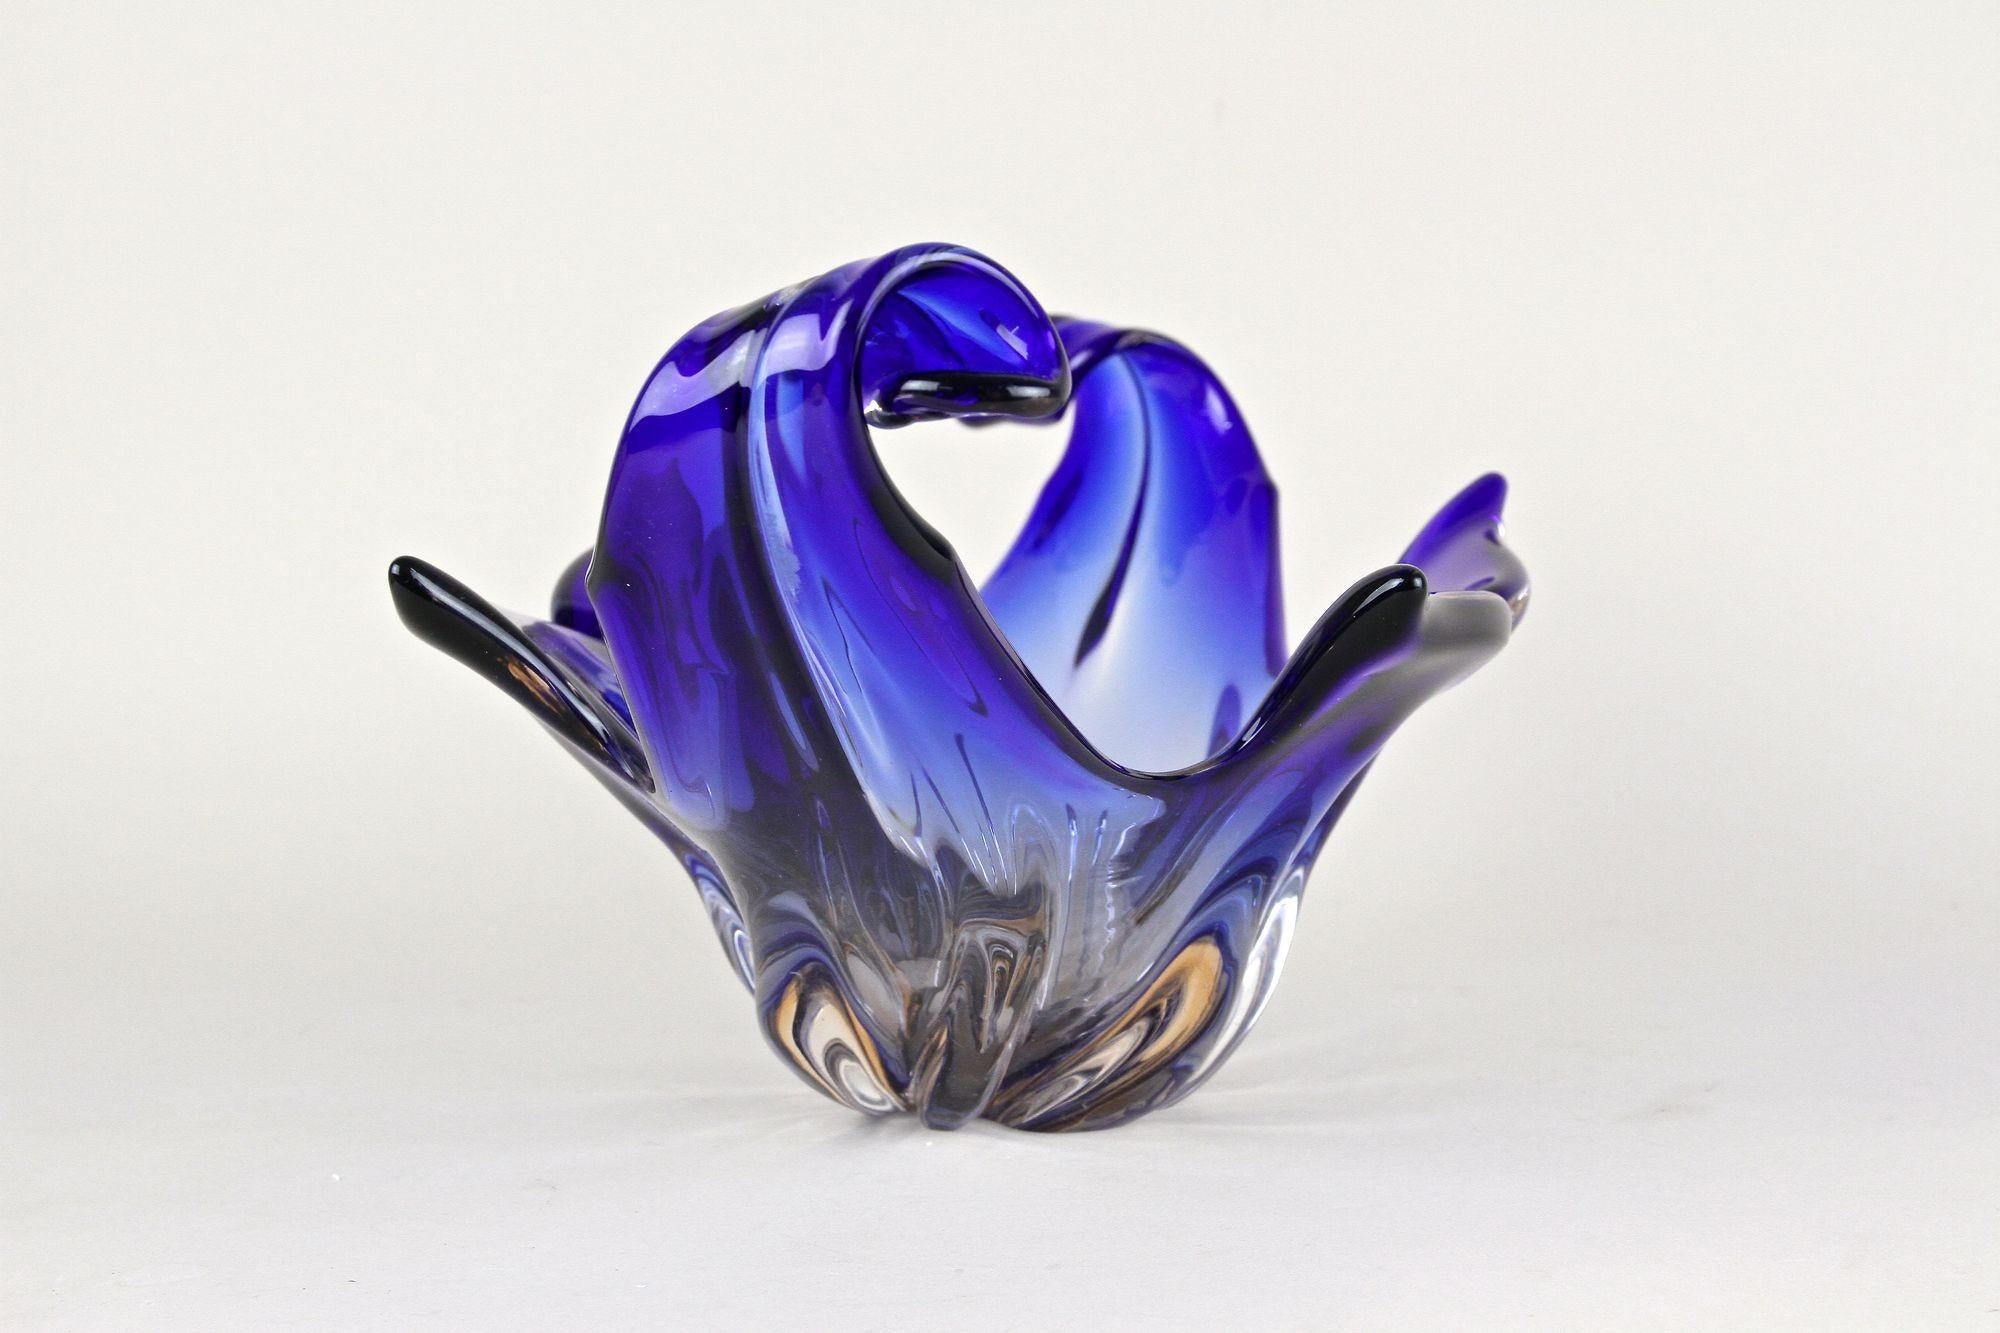 Blue Murano Glass Bowl - Mid-Century Modern, Italy circa 1960/70 For Sale 2